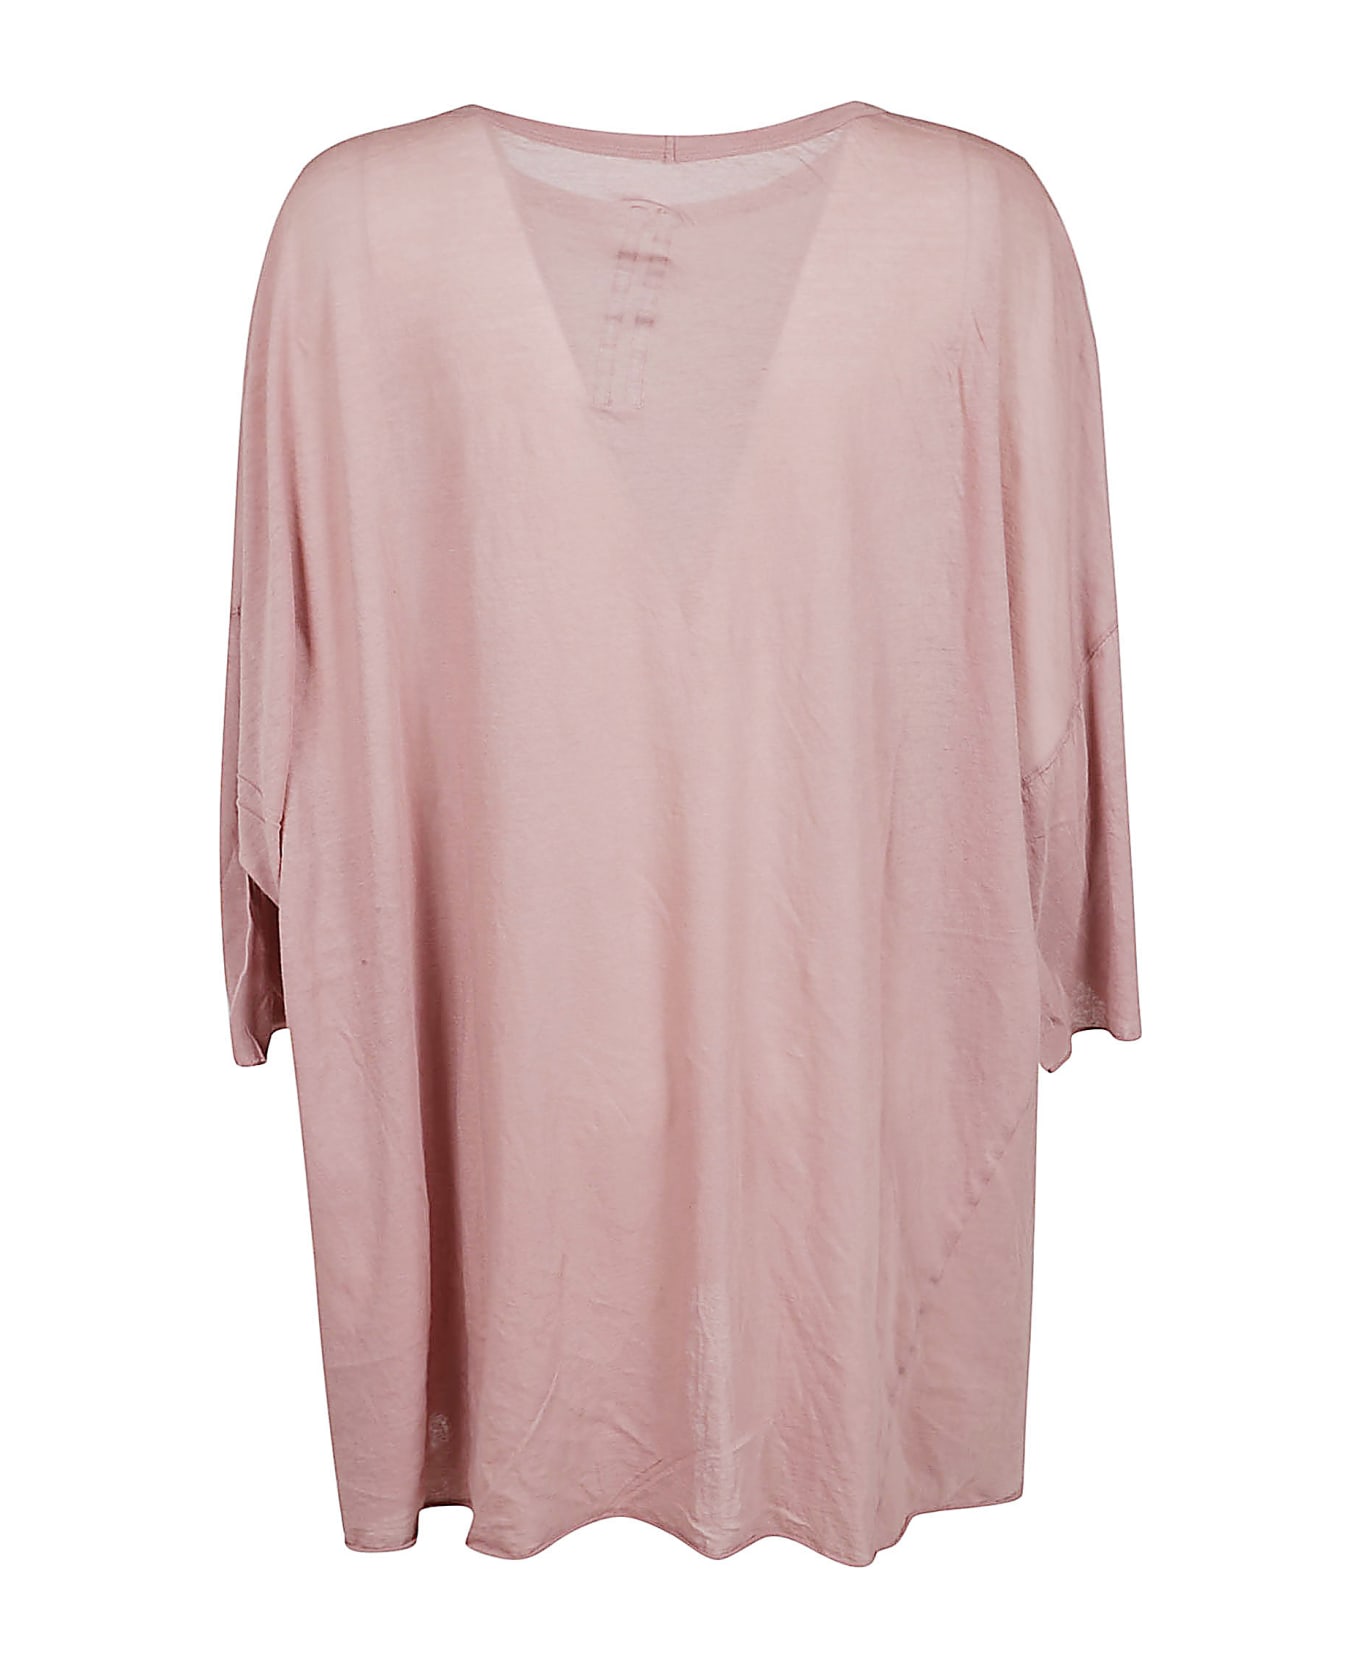 Rick Owens Tommy T-shirt - Dusty Pink シャツ